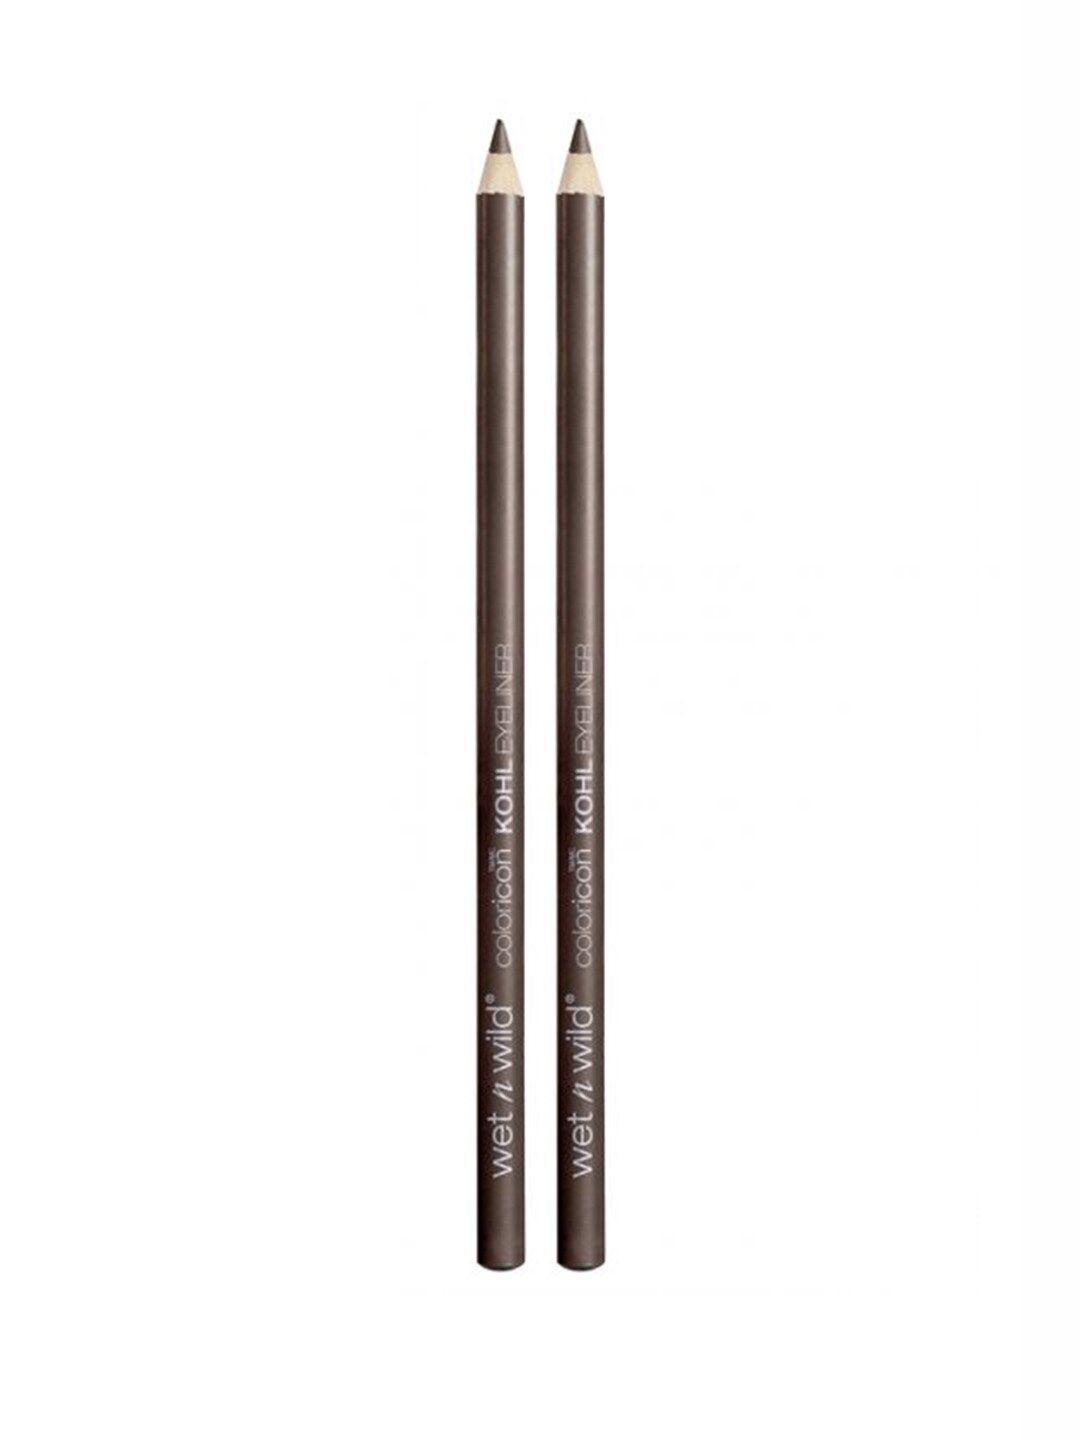 wet n wild set of 2 simma brown now color icon kohl liner pencil e603a